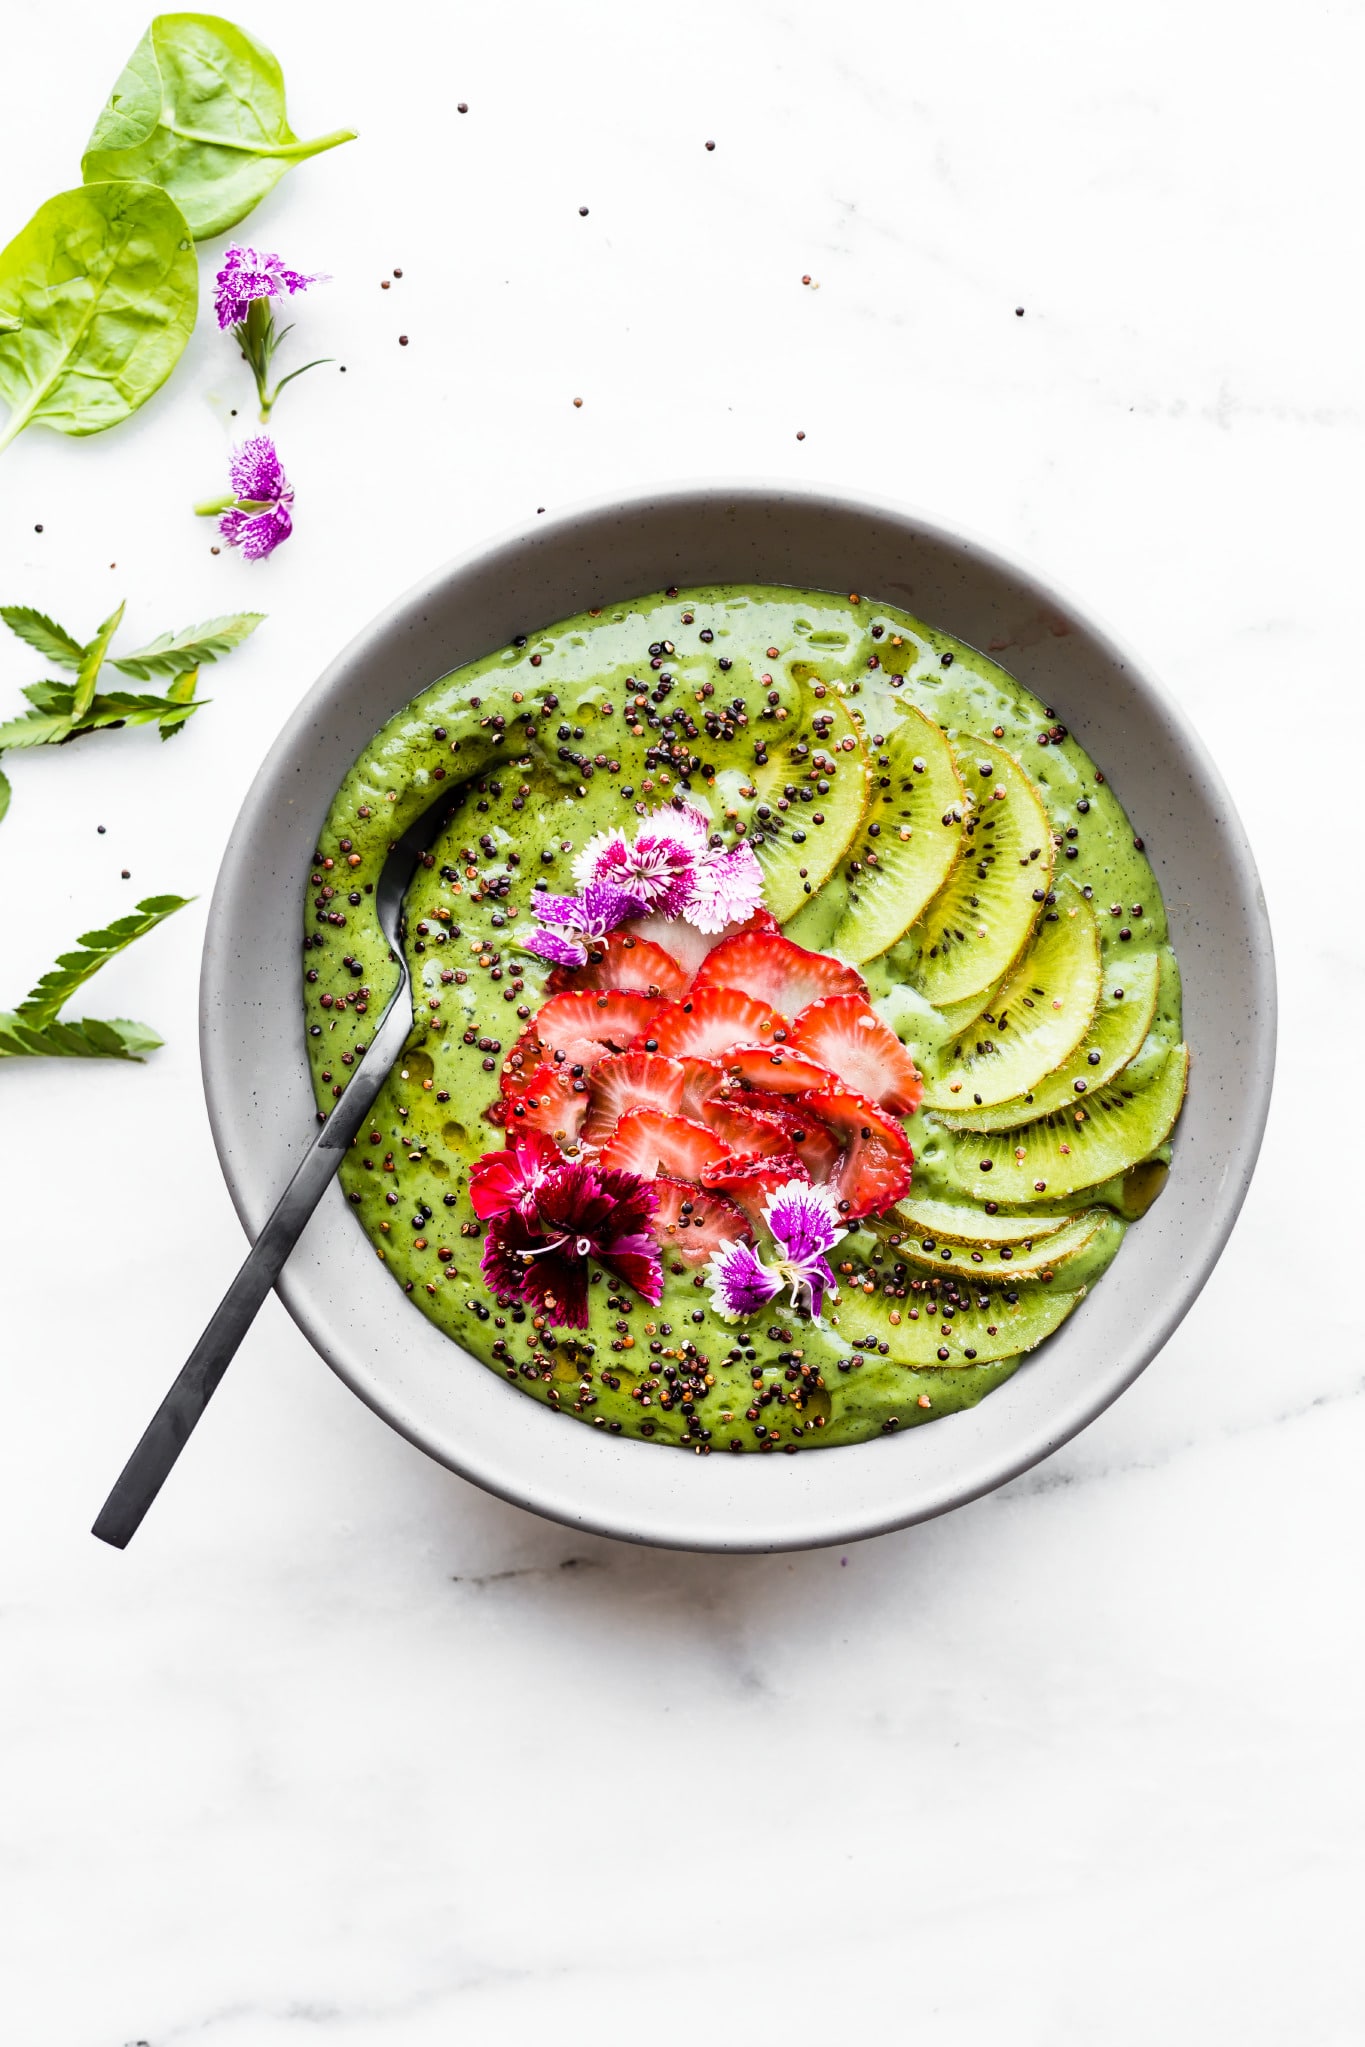 Overhead image of green smoothie bowl with kiwi, strawberries, and chia seeds.